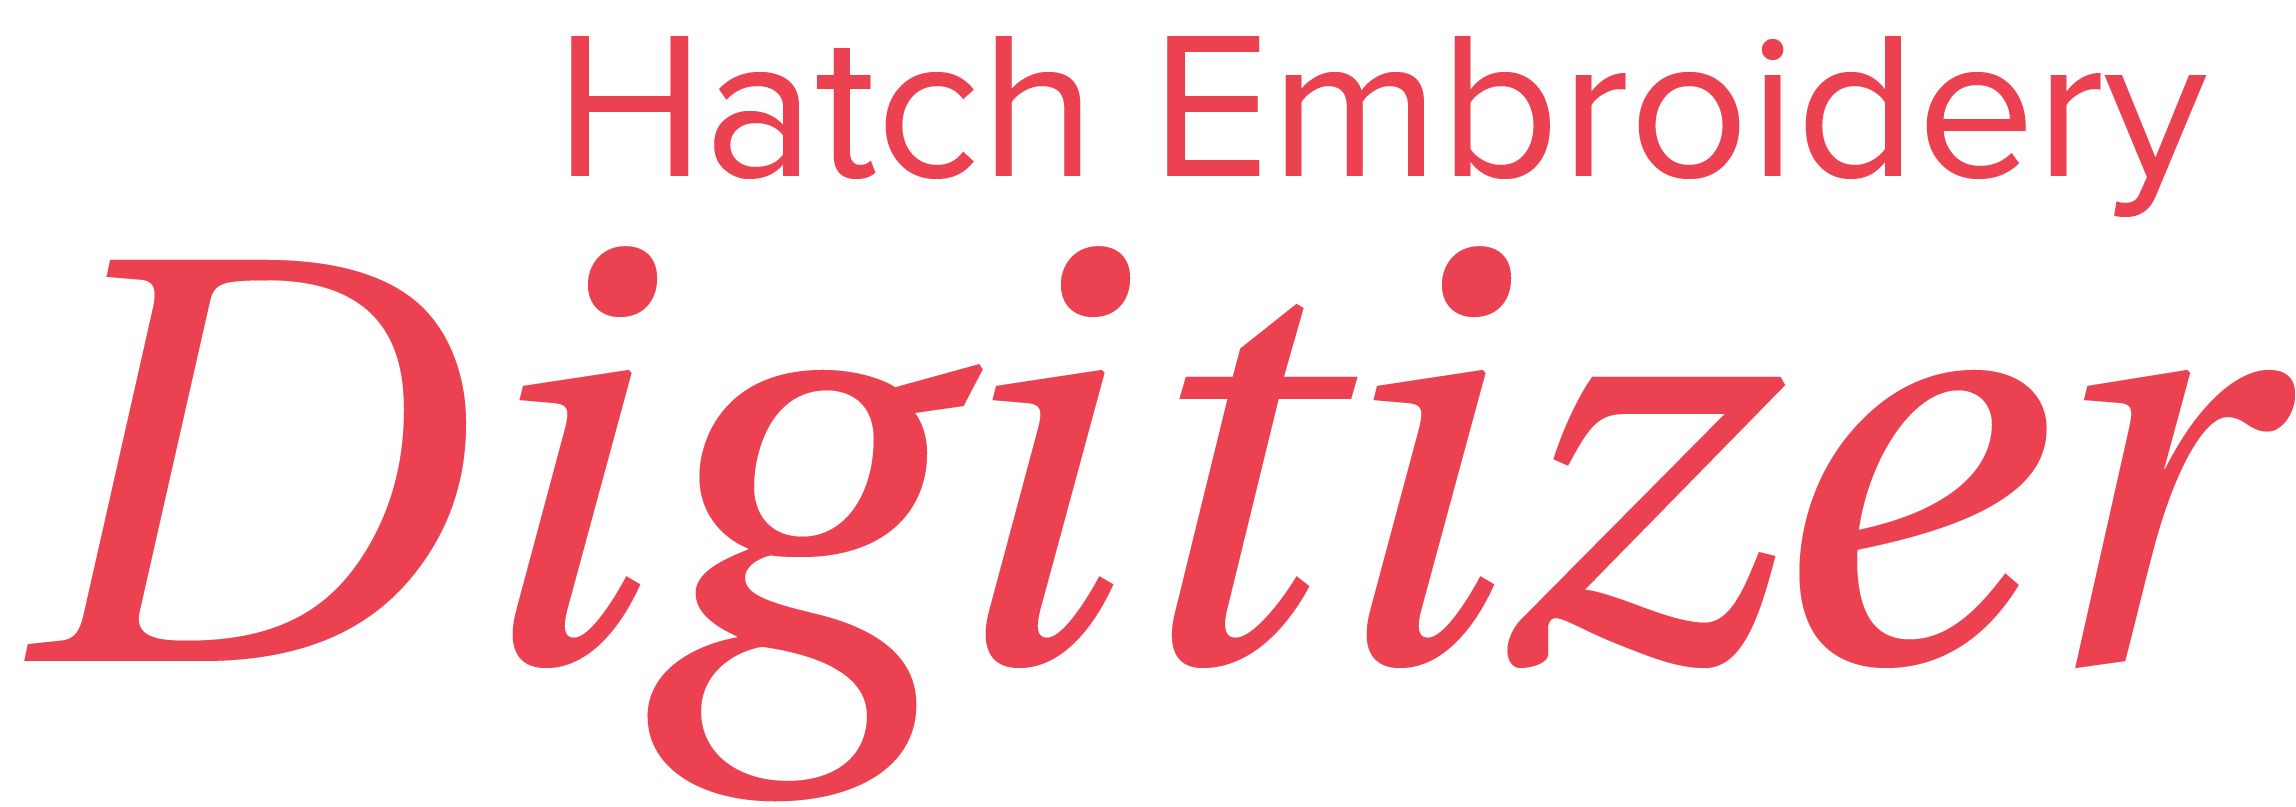 hatch embroidery digitizer serial